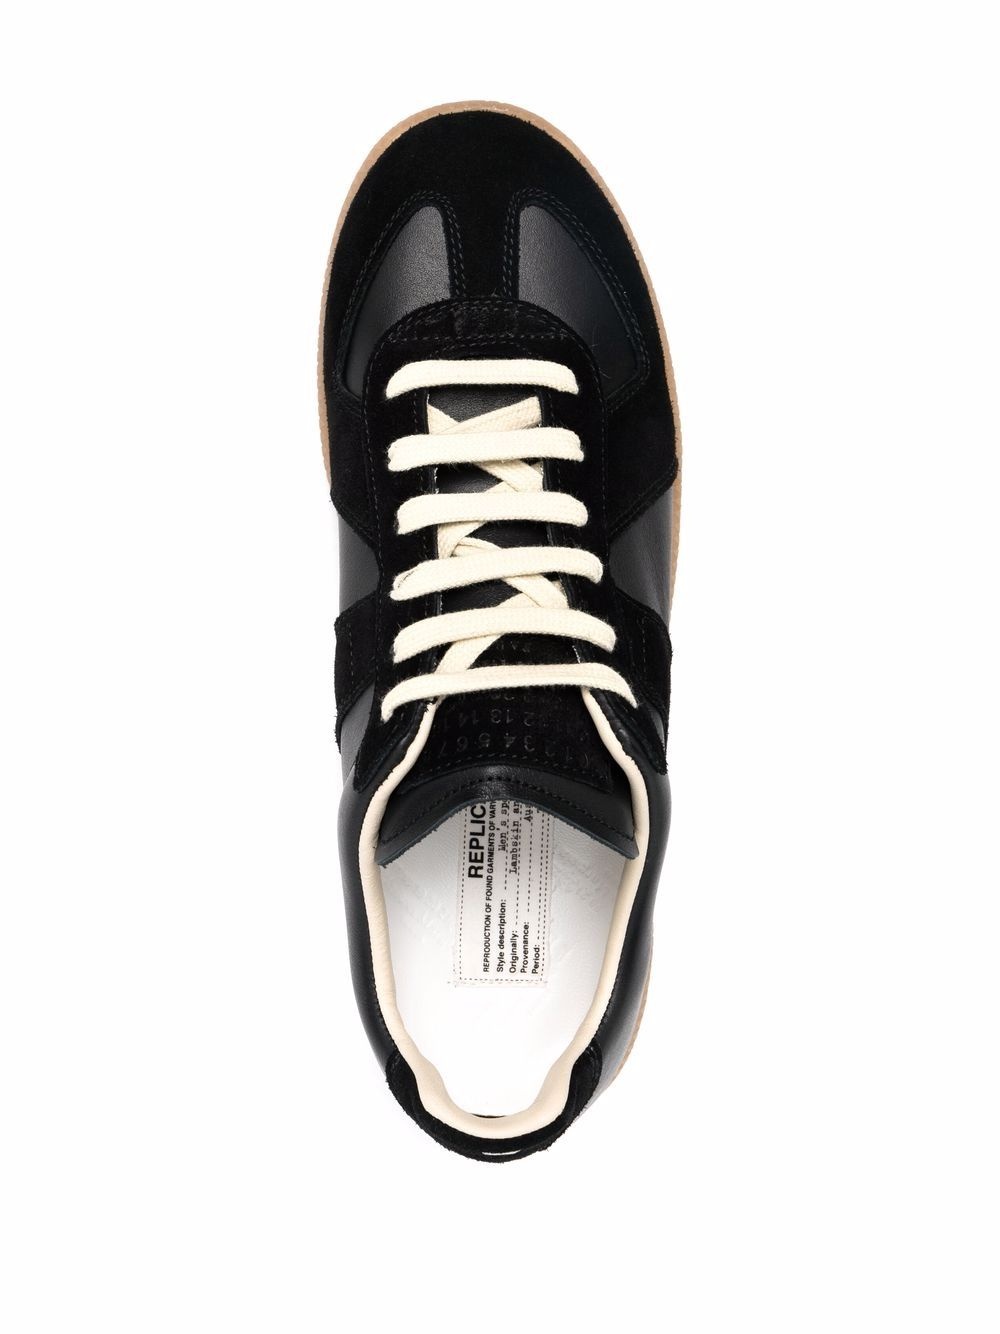 Replica leather sneakers - 4